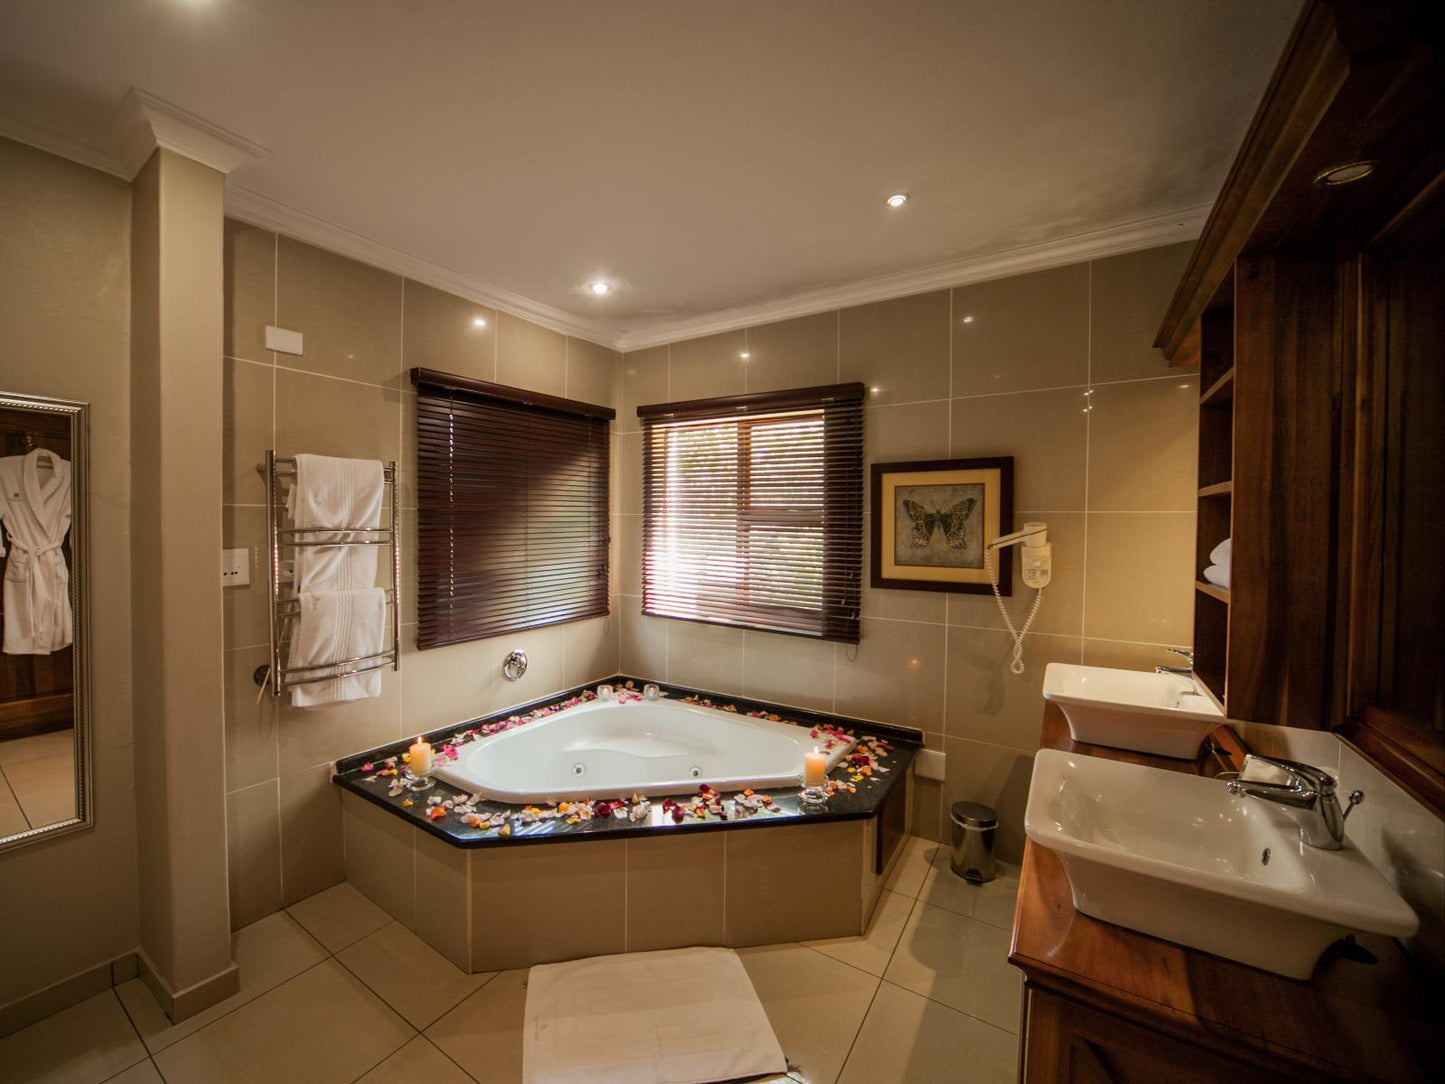 Executive Spa Suite 8 @ Fairview Hotels, Spa & Golf Resort